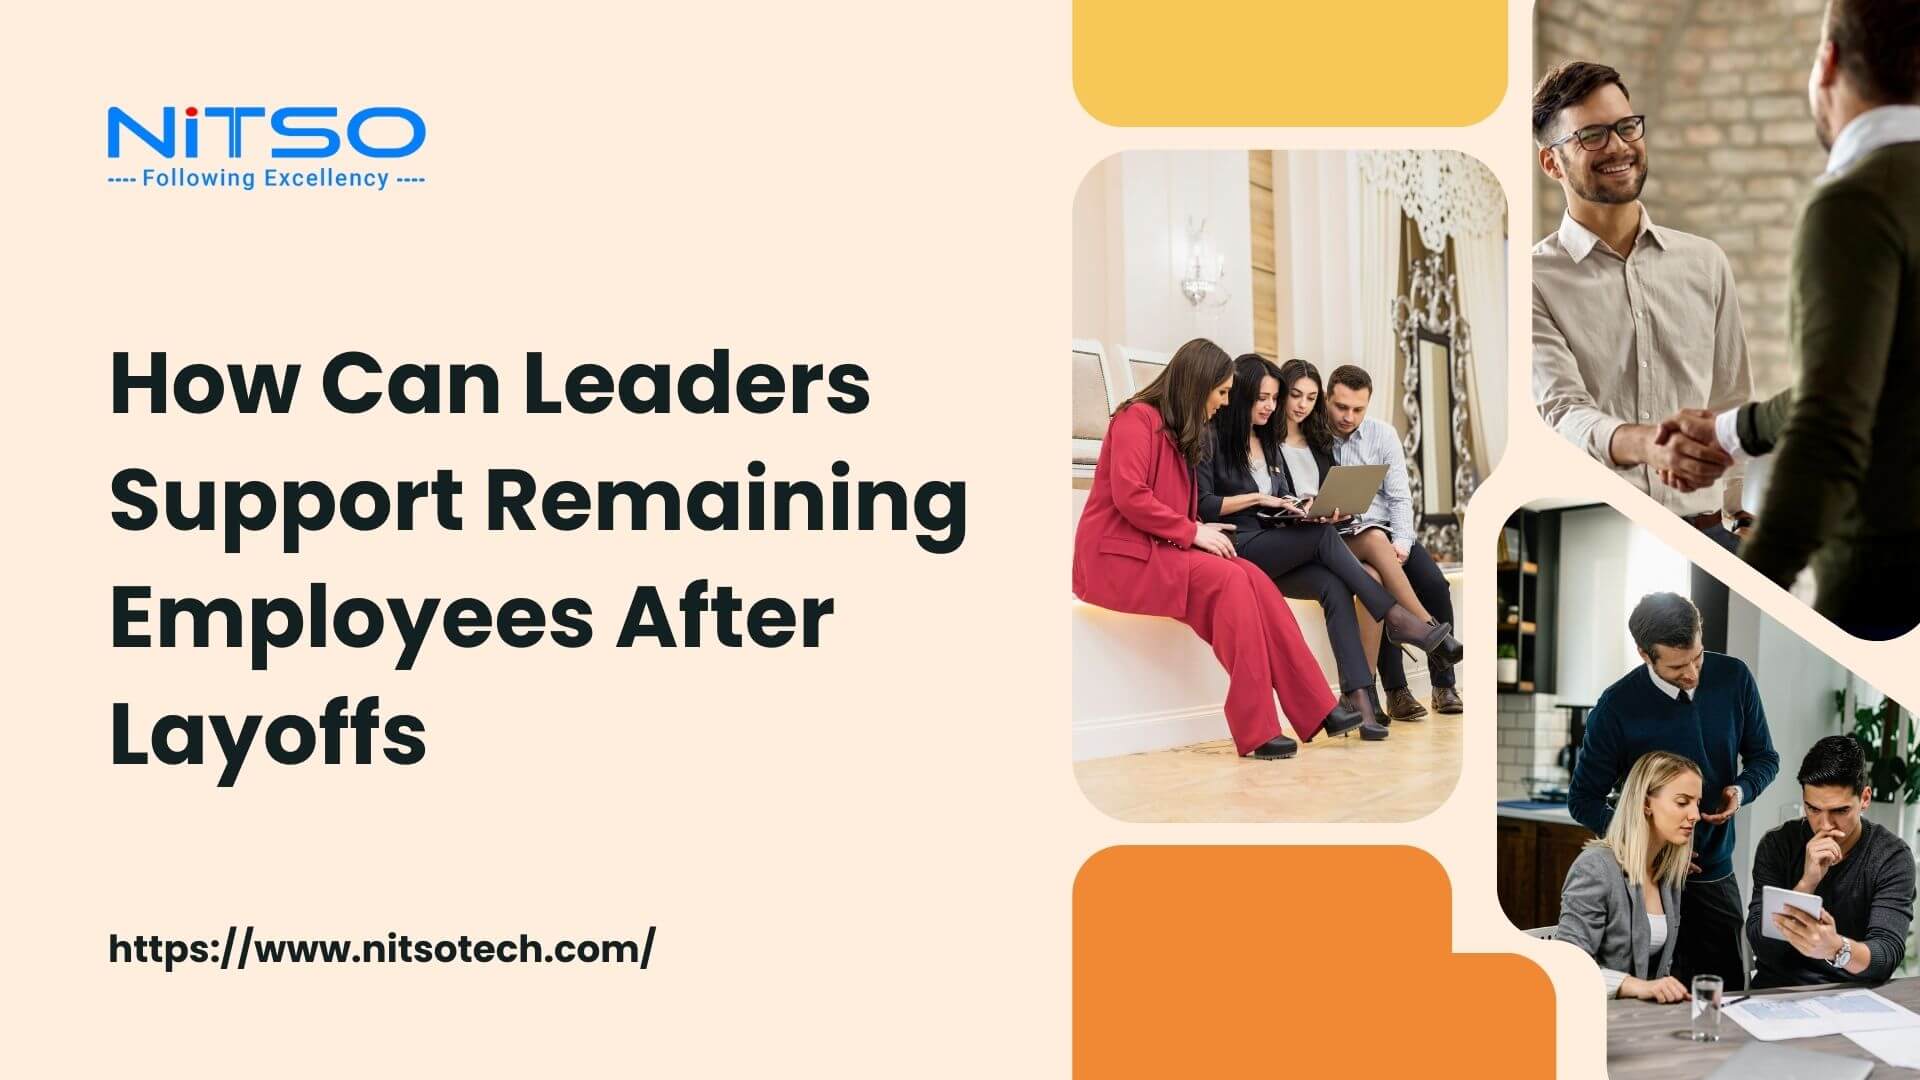 Best Ways to Support Remaining Employees After Layoffs